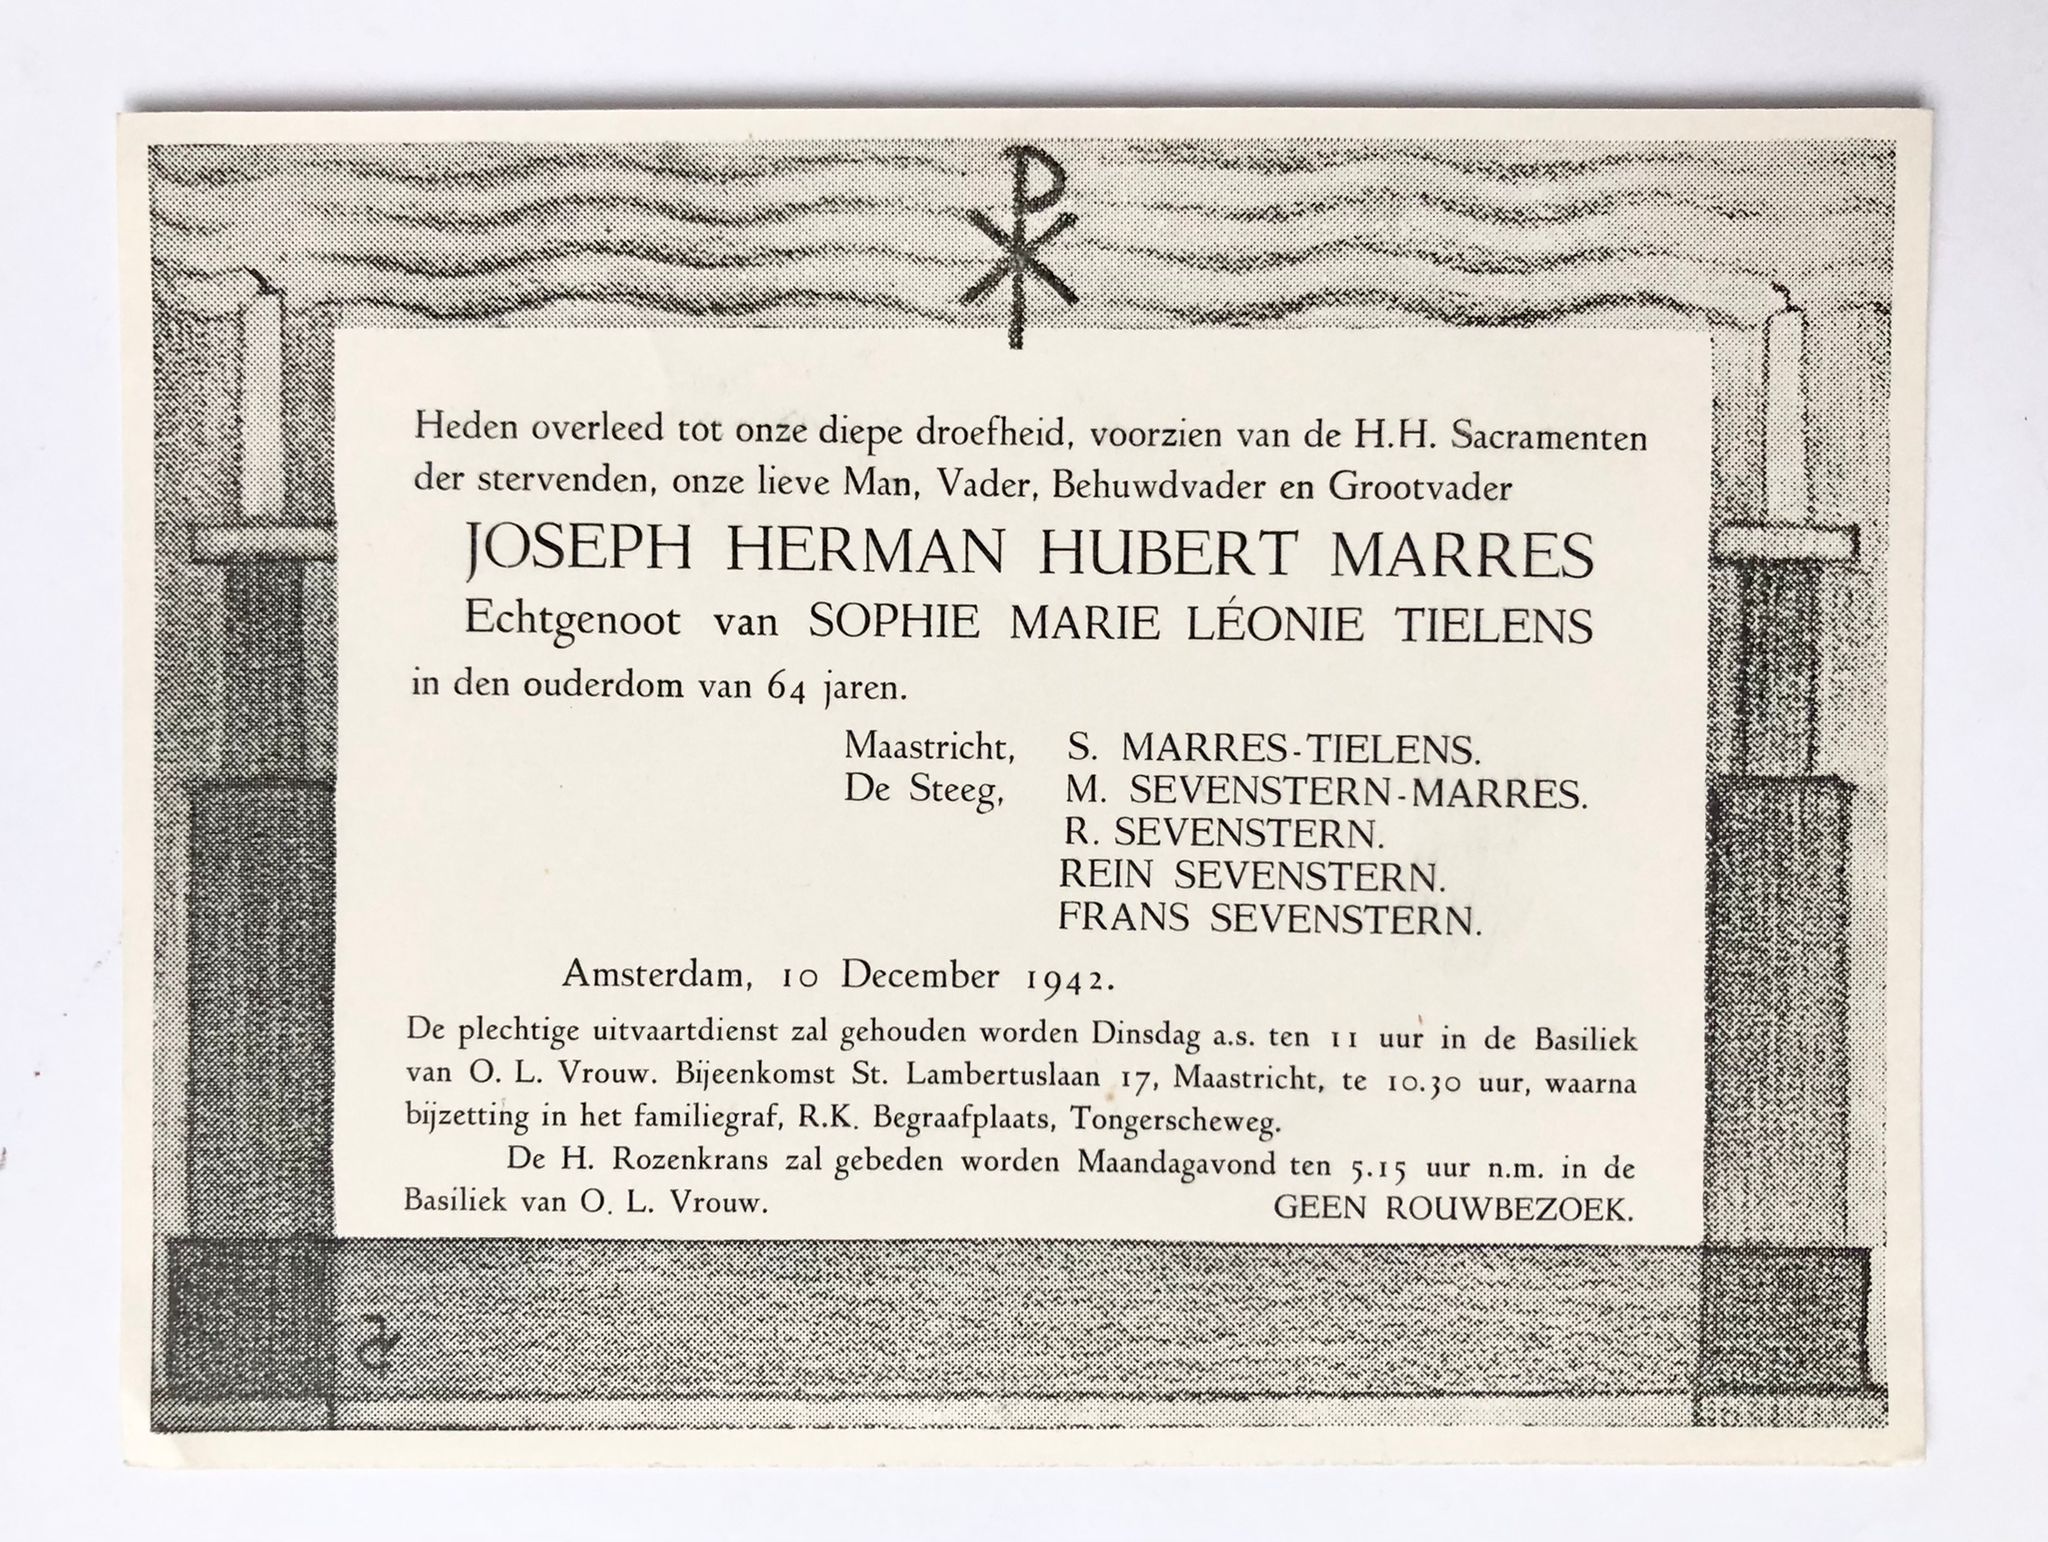  - [Death announcement 1943] Two printed death announcements for J.H.H. Marres. Maastricht, 1943, 2 pp.